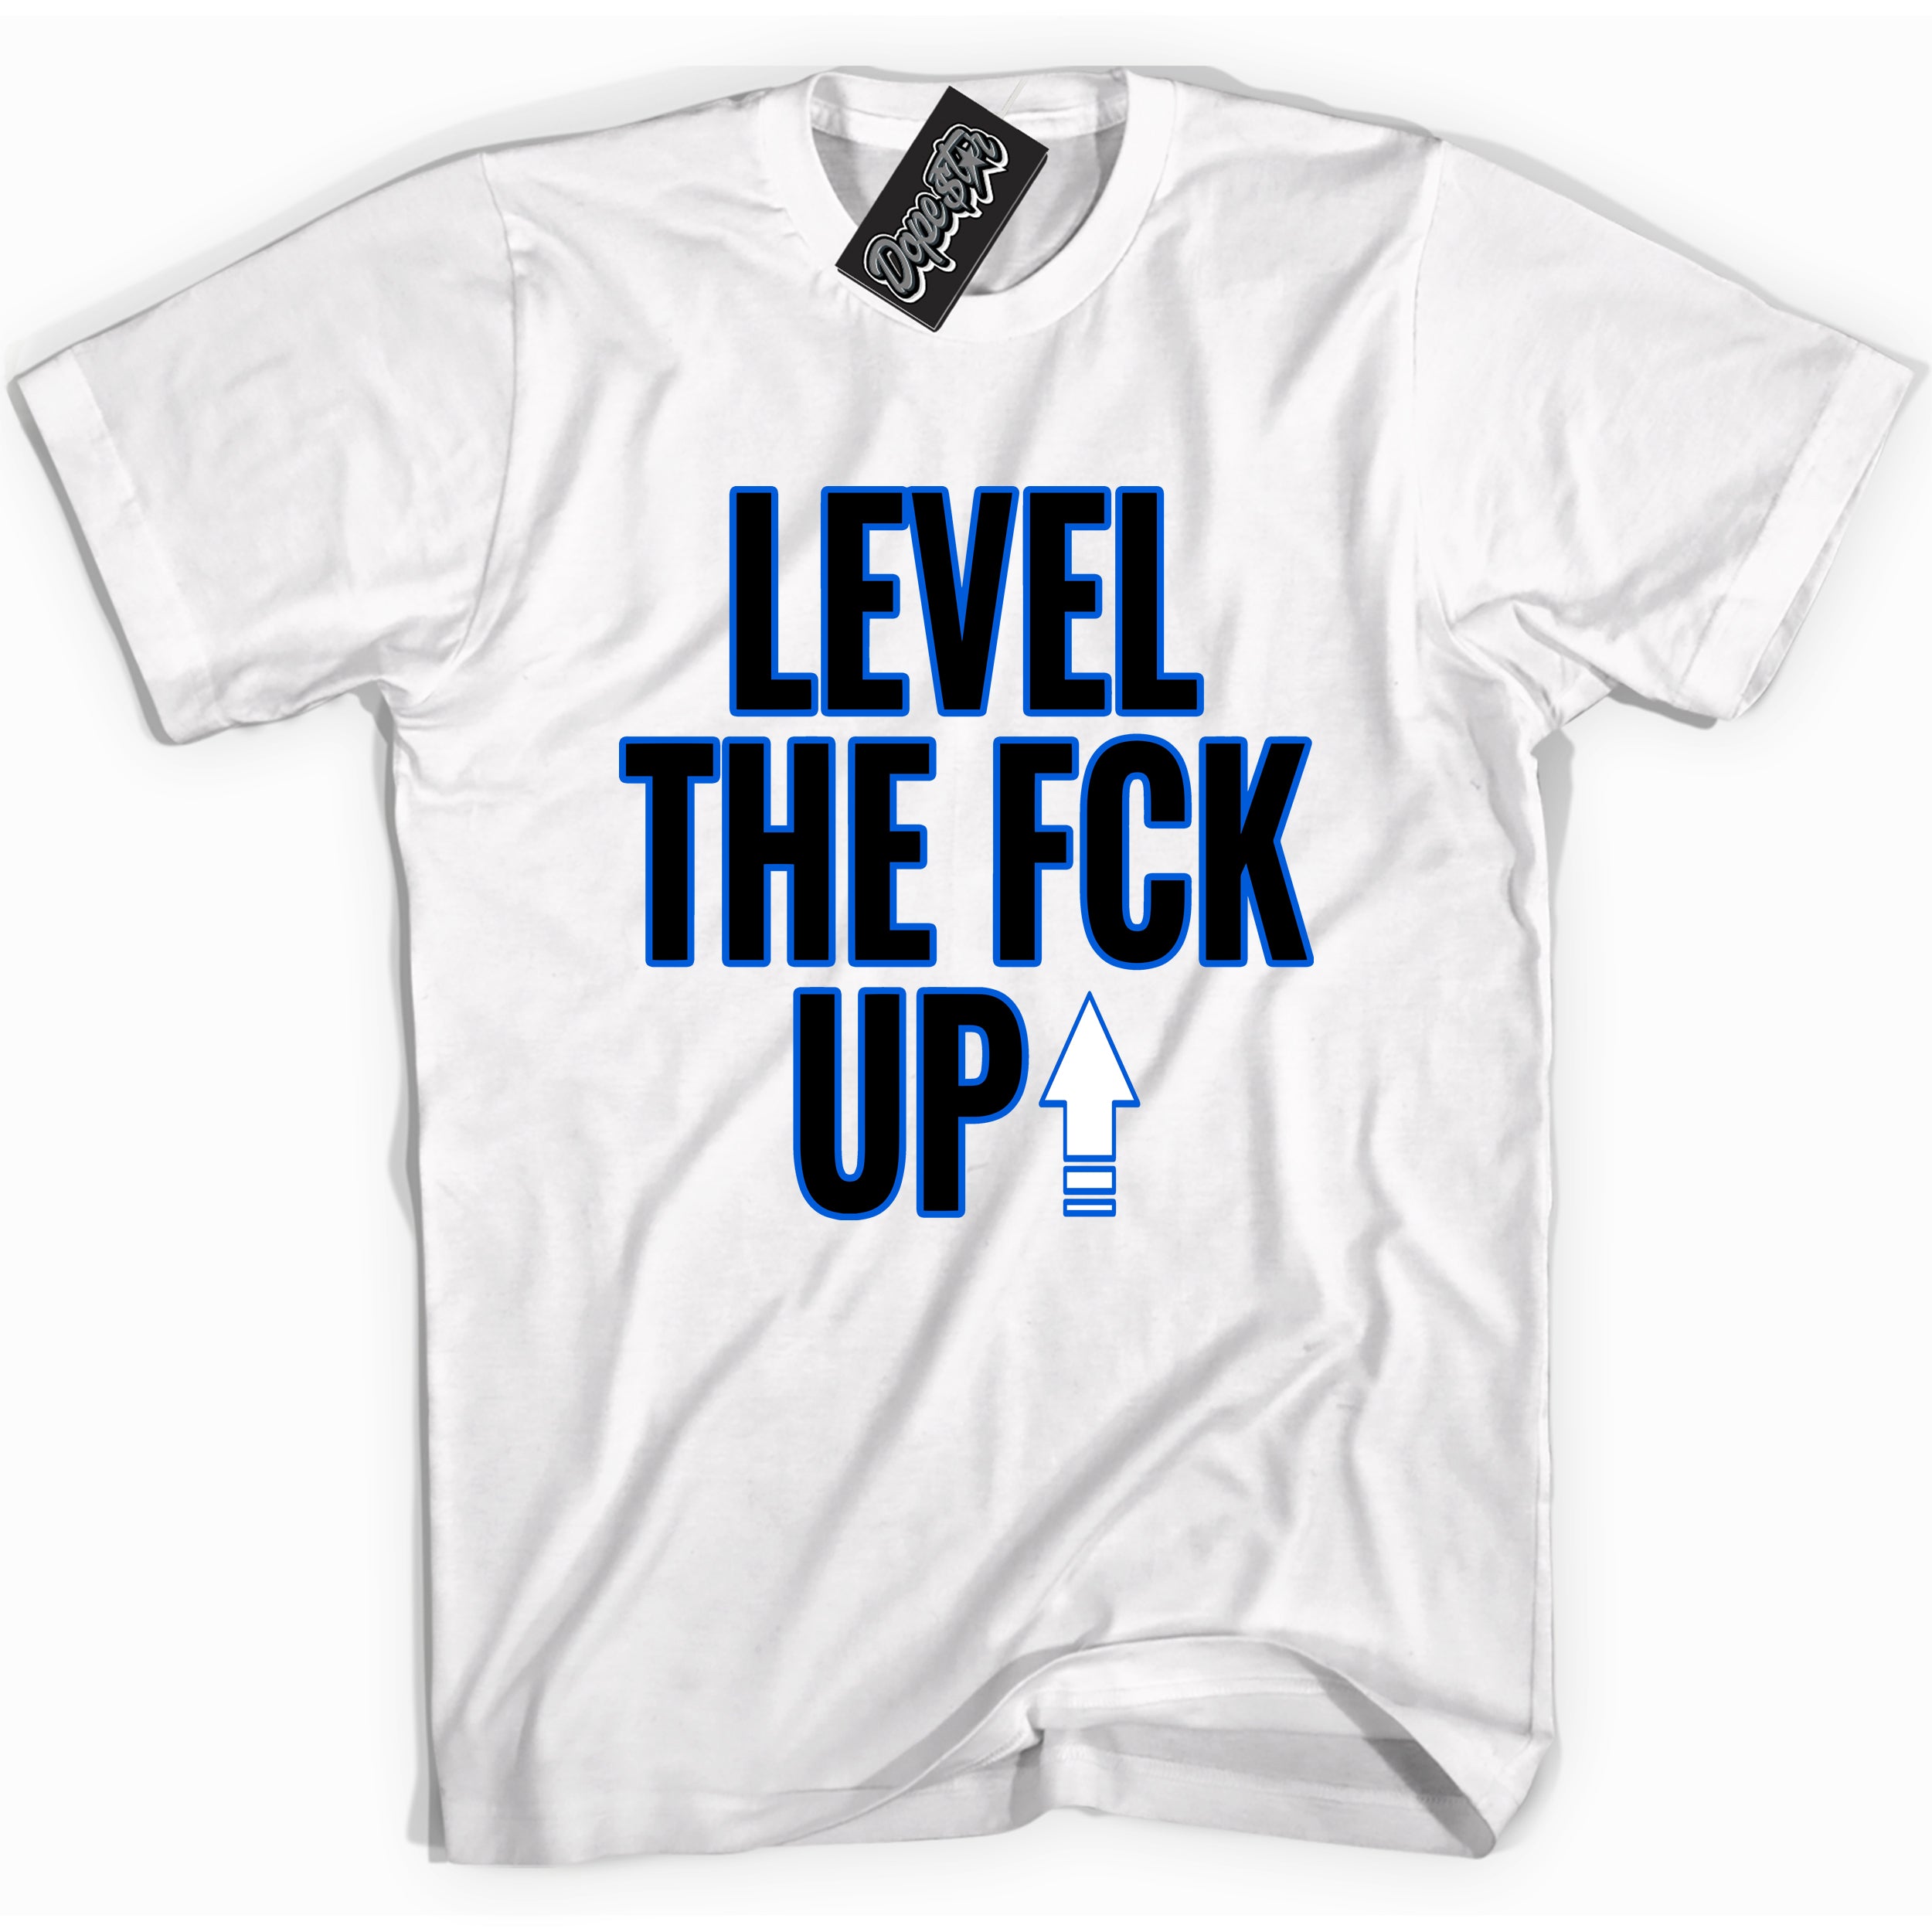 Cool White graphic tee with "Level The Fck Up" design, that perfectly matches Royal Reimagined 1s sneakers 